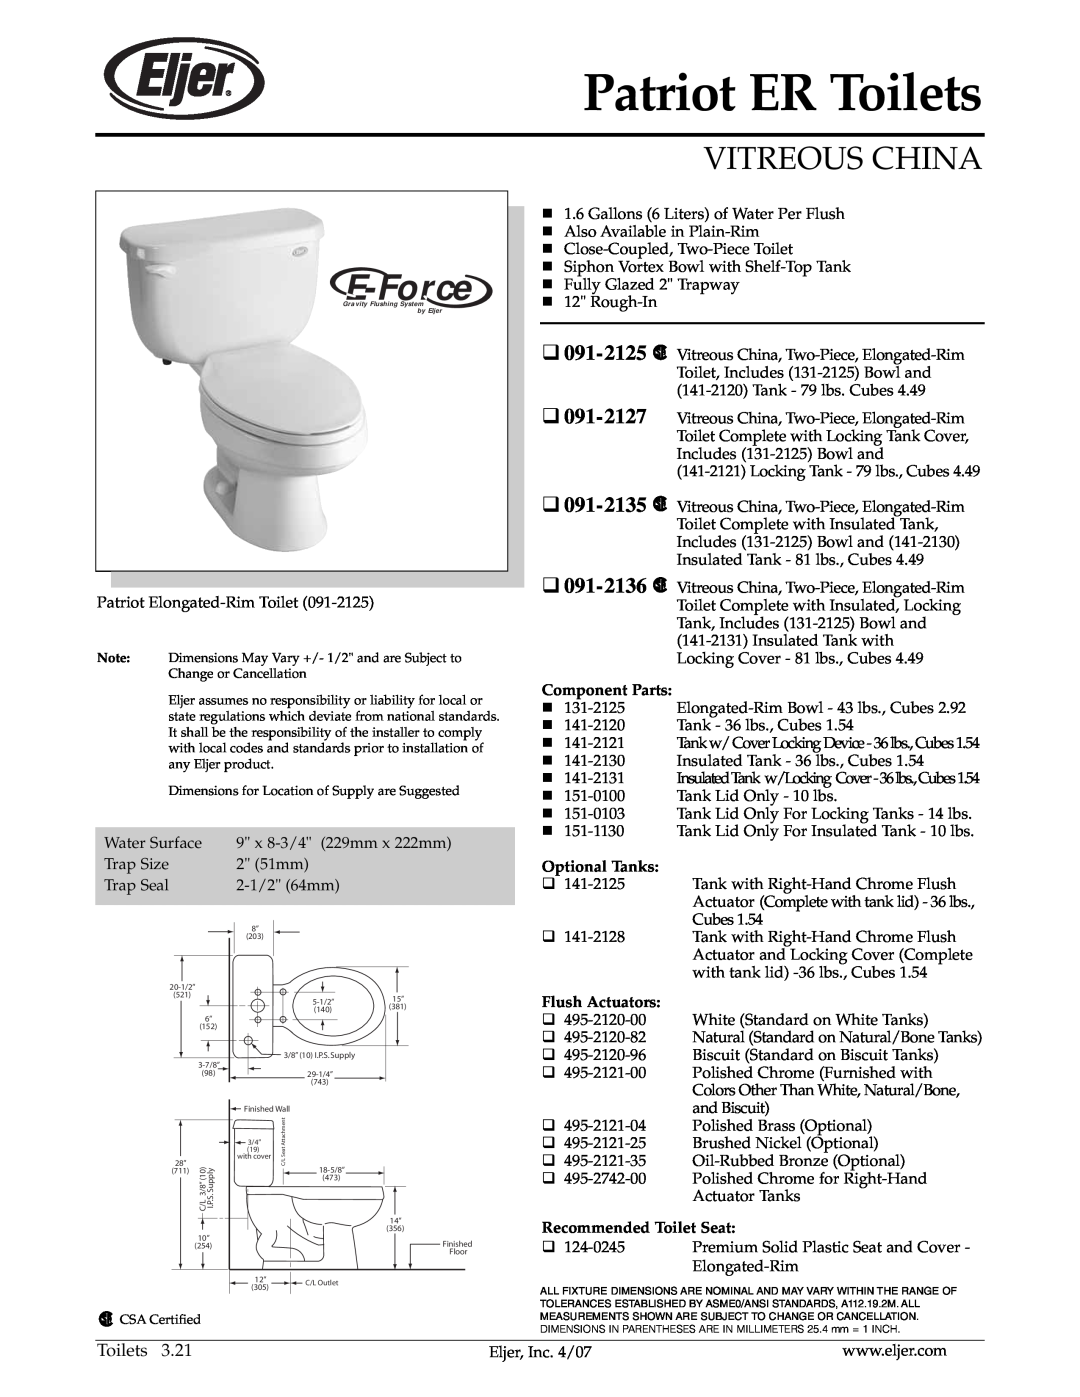 American Standard 091-2136 dimensions Patriot ER Toilets, E-Force, Vitreous China, 091-2125, 091-2127, 091-2135, Trap Size 